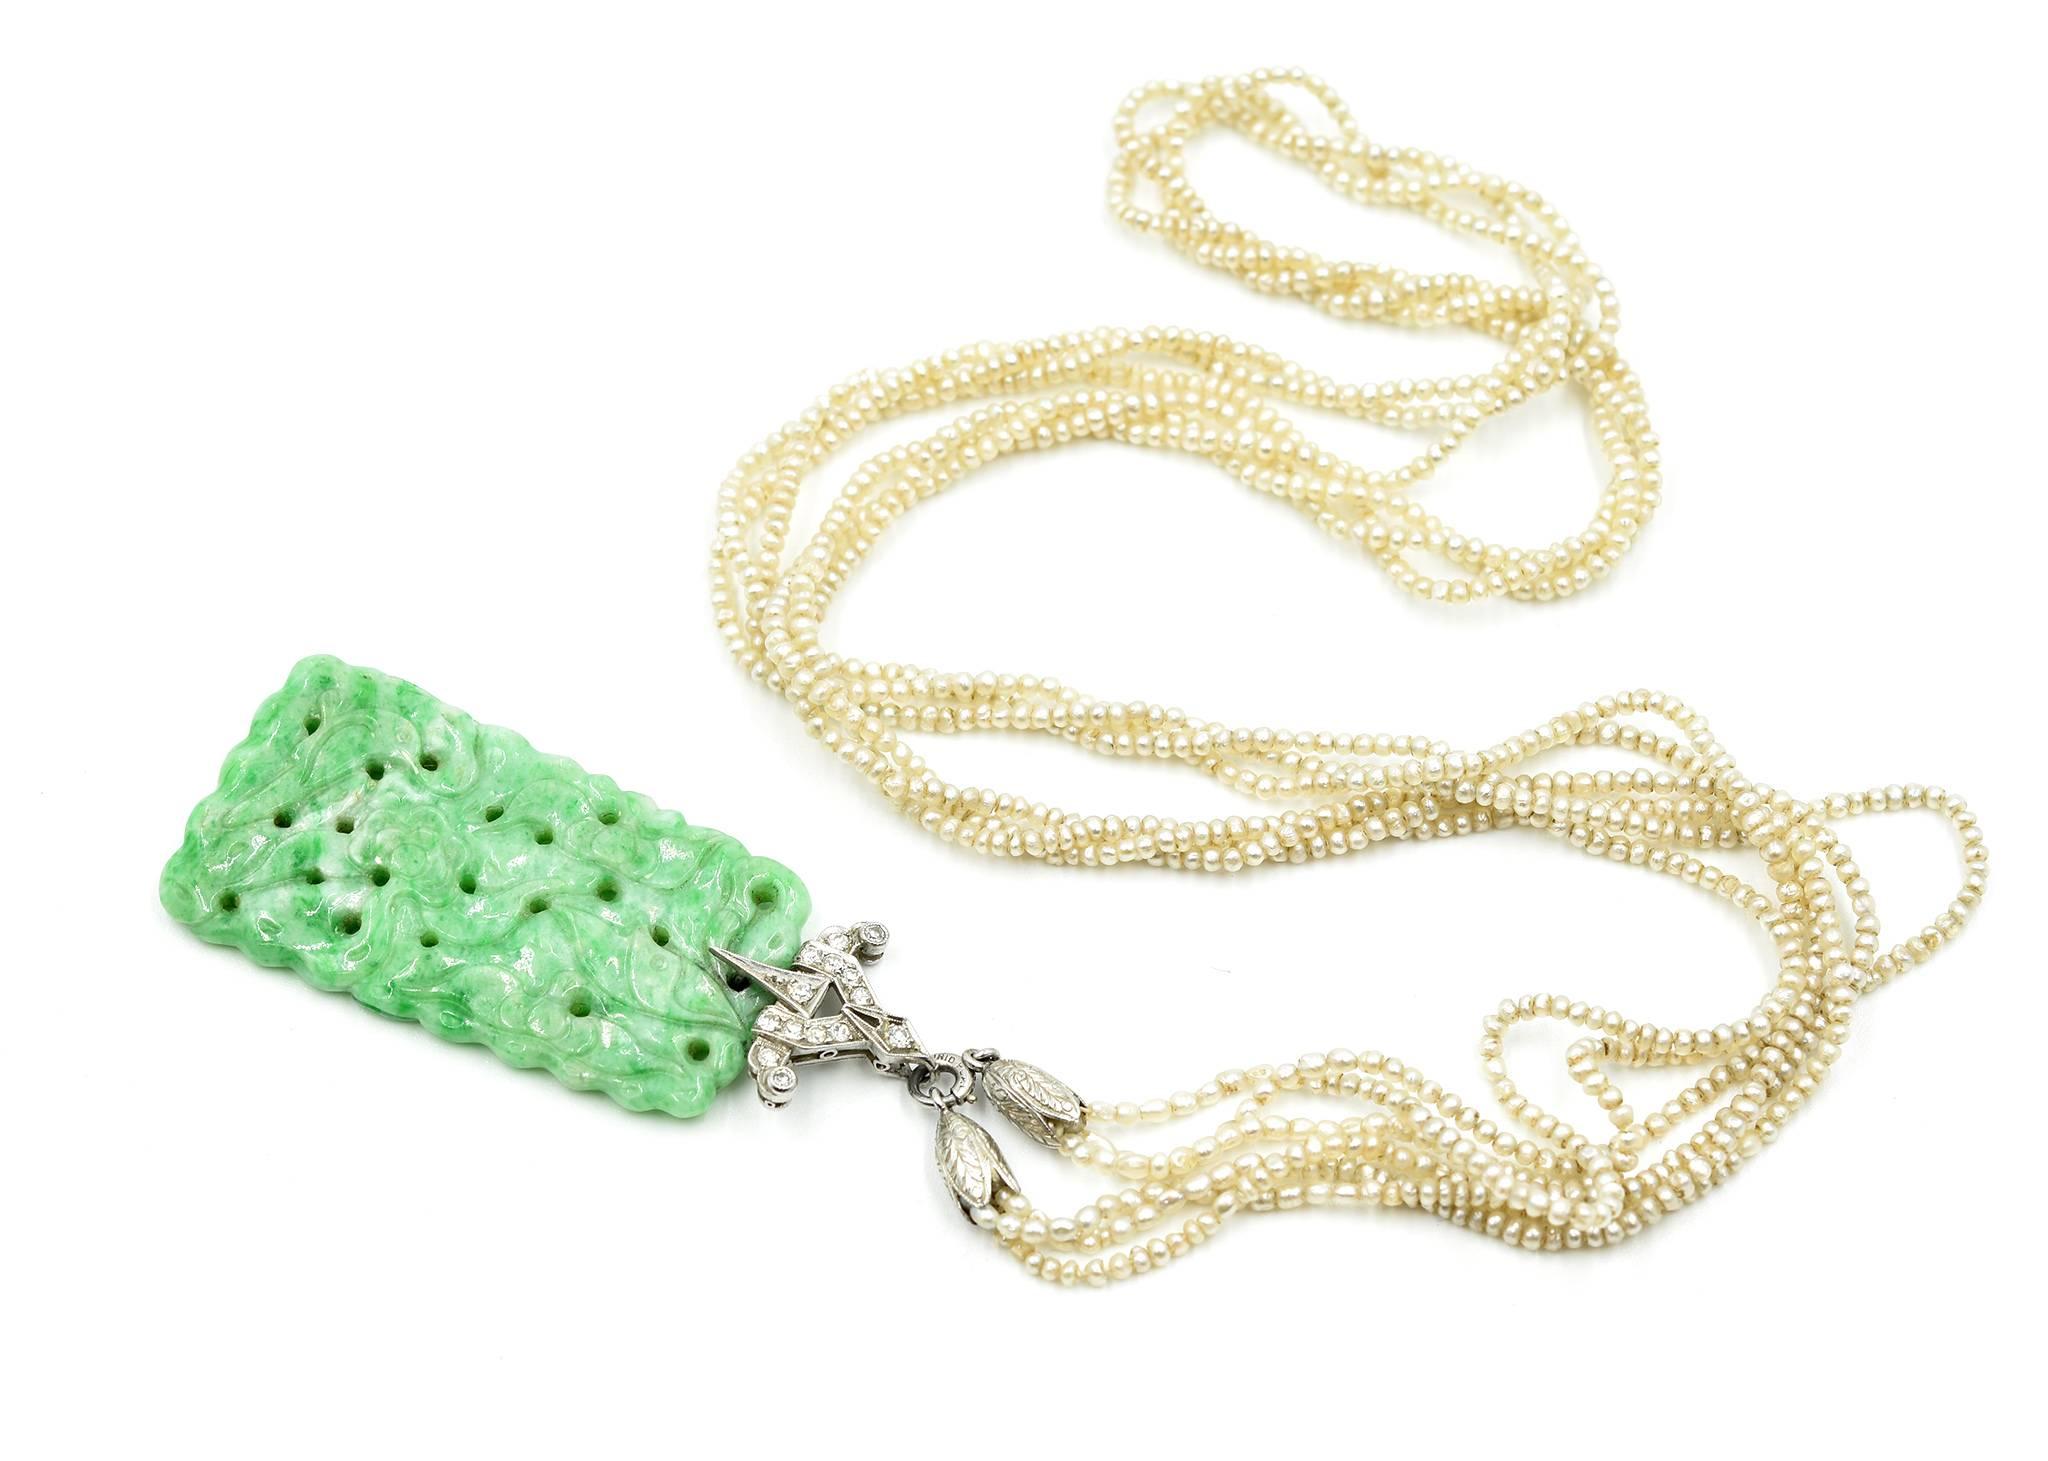 Introduced and designed by elite designer… Tiffany & Co! This is a 24” inch multi-strand of seed pearls with a diamond set, jade pendant, made in platinum! The jade pendant is designed with a diamond set platinum bail. The bail is made with a